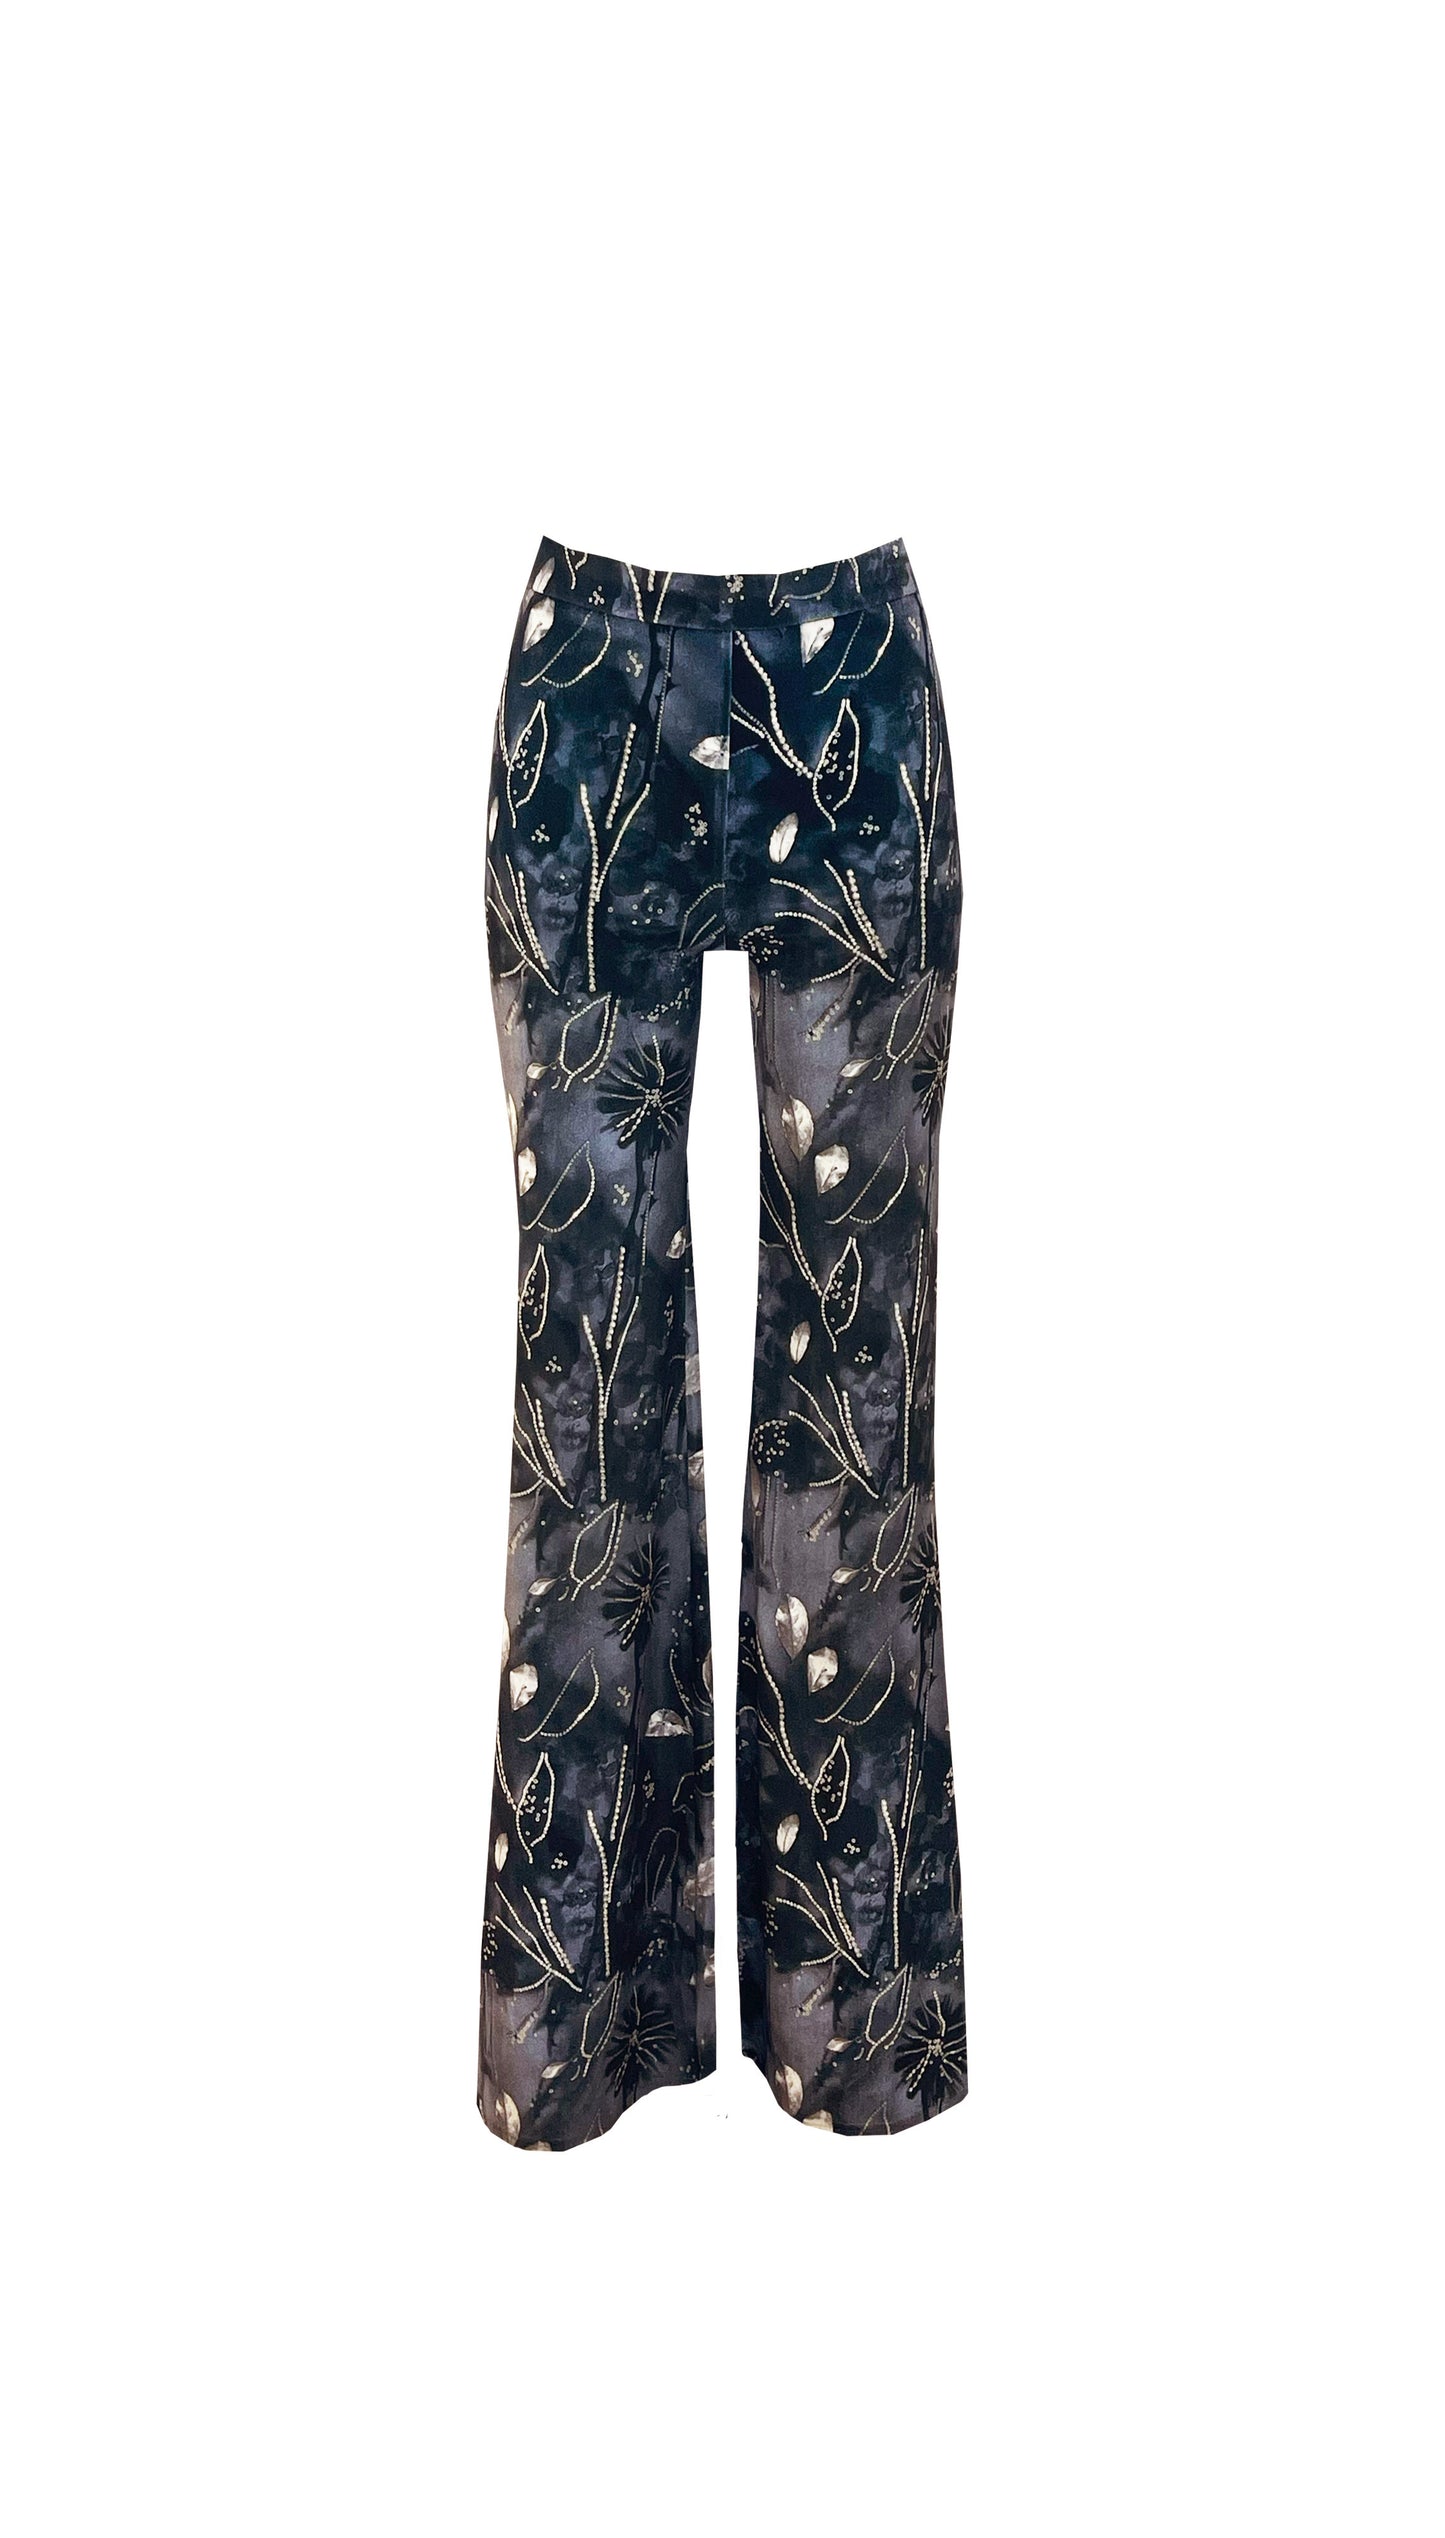 The Velvet Trousers in Airbrush Lace